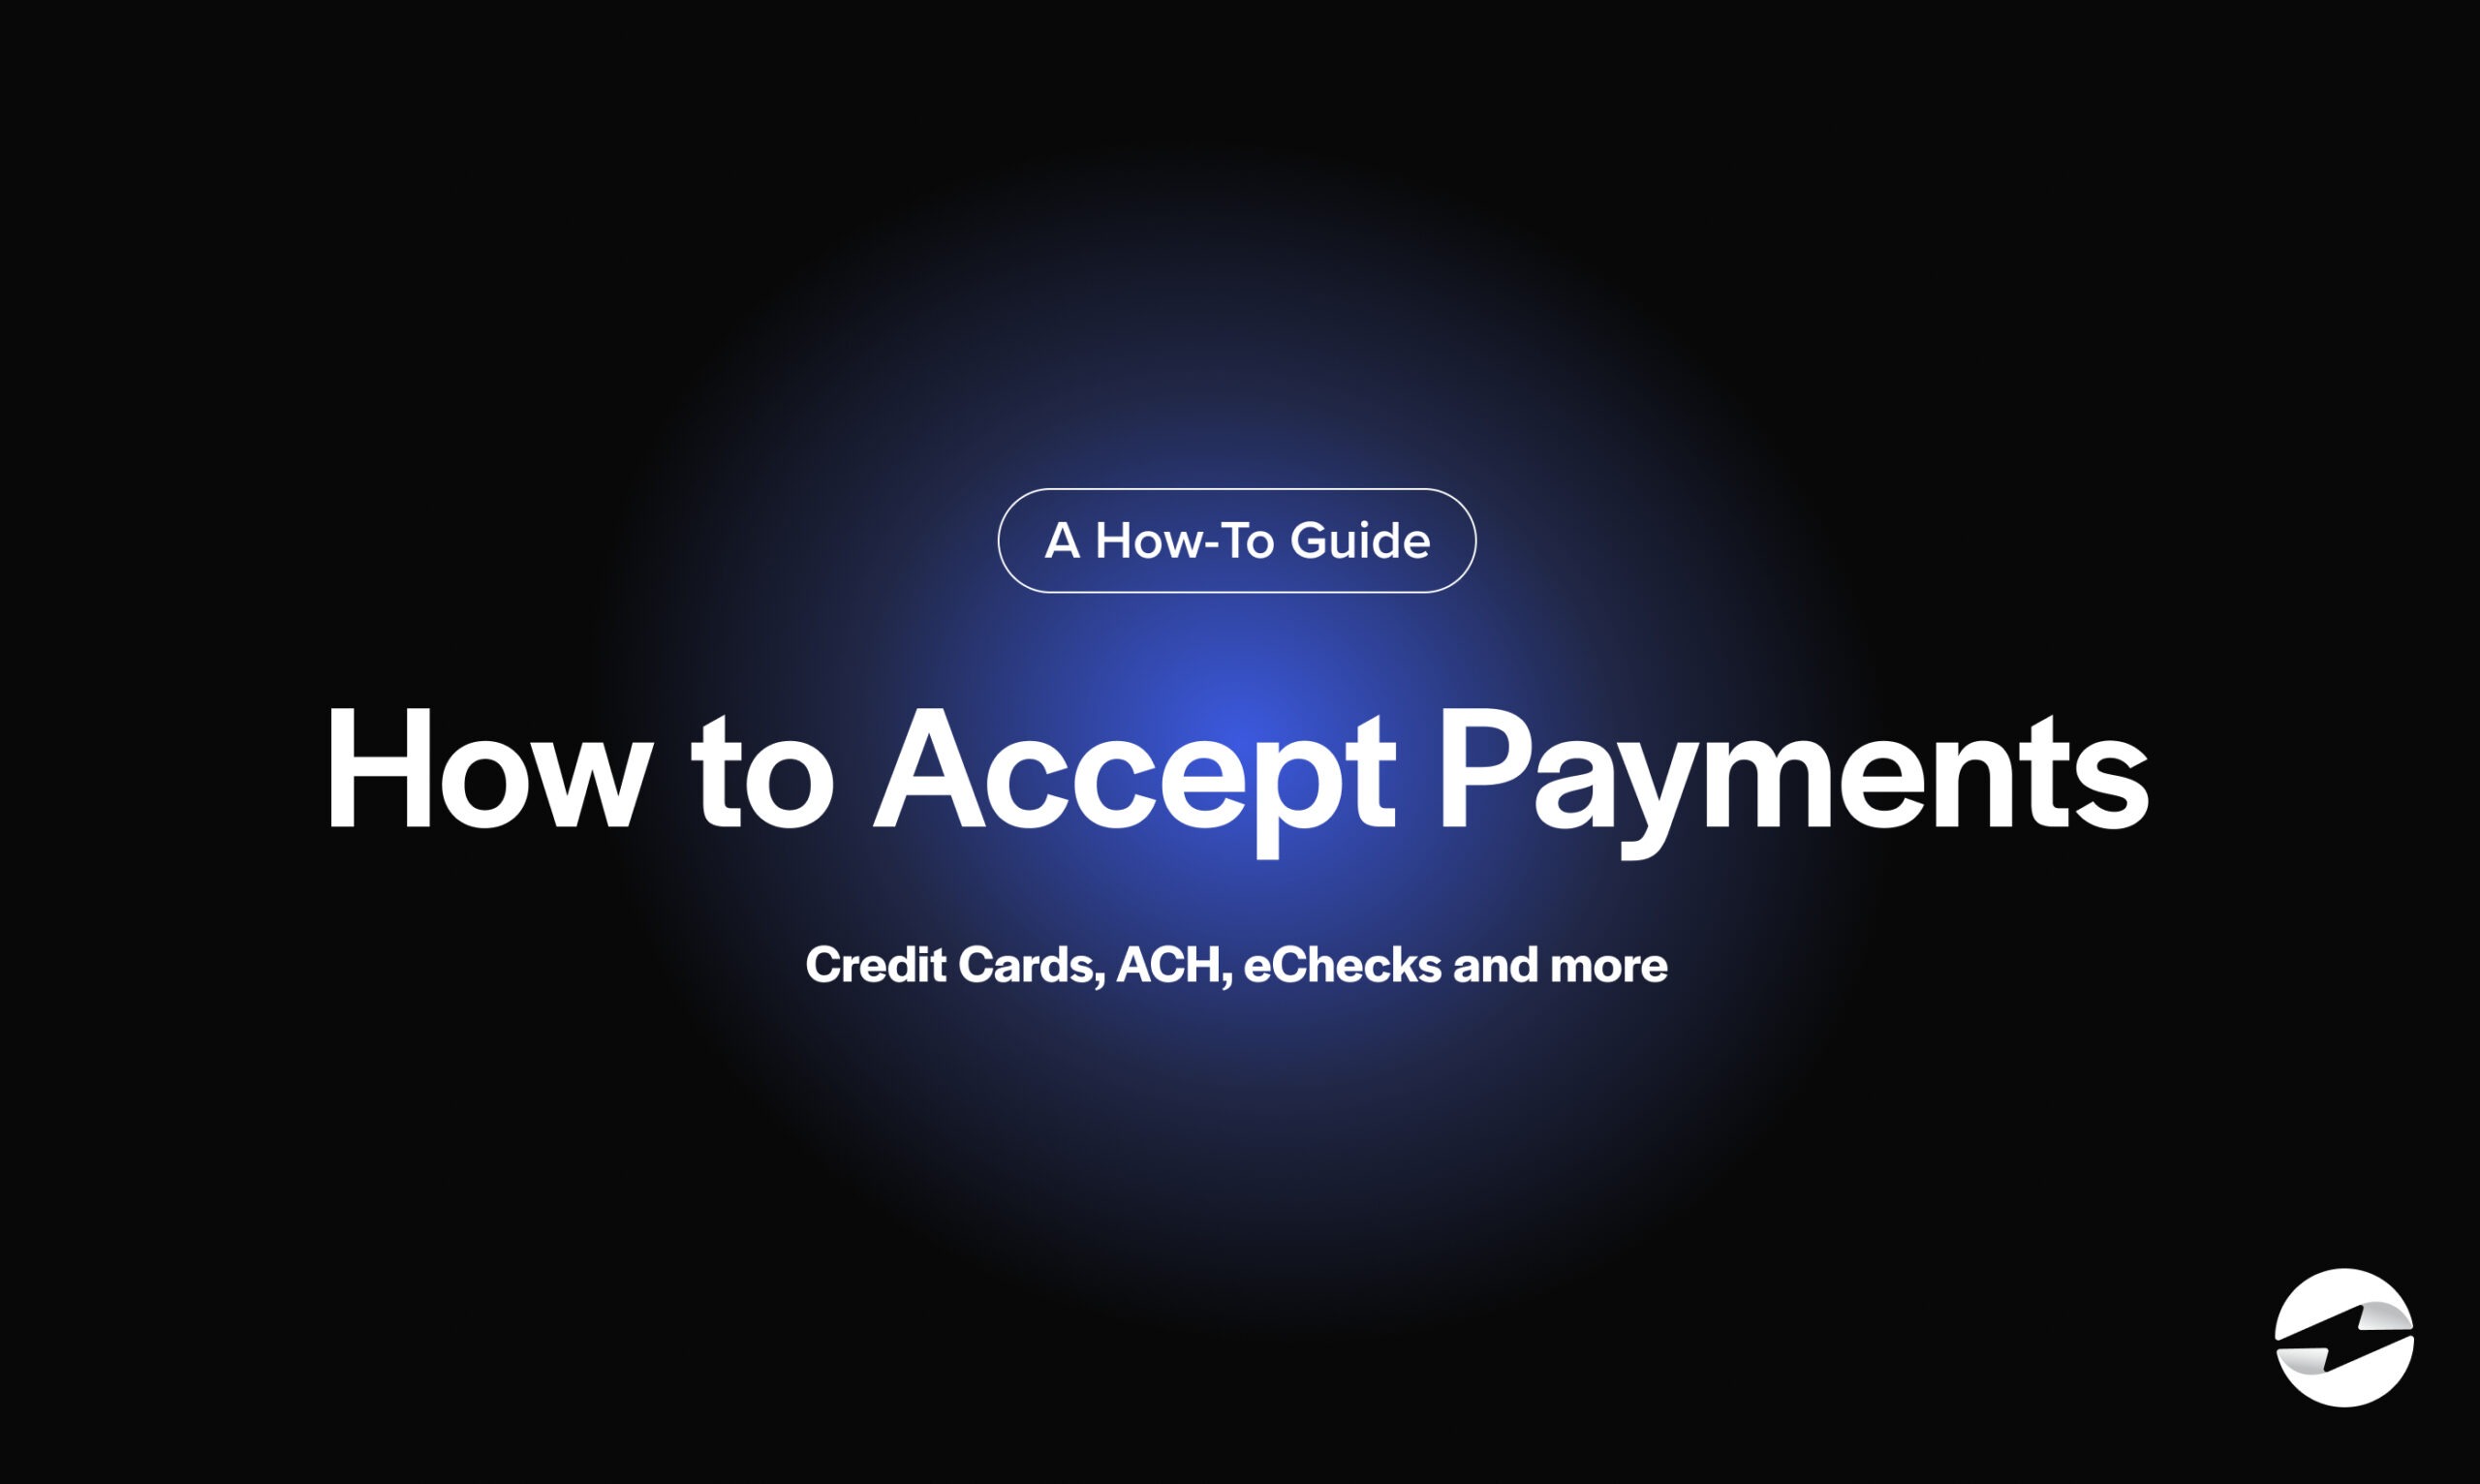 How to Accept Payments Online: Credit Cards, ACH, eChecks and more